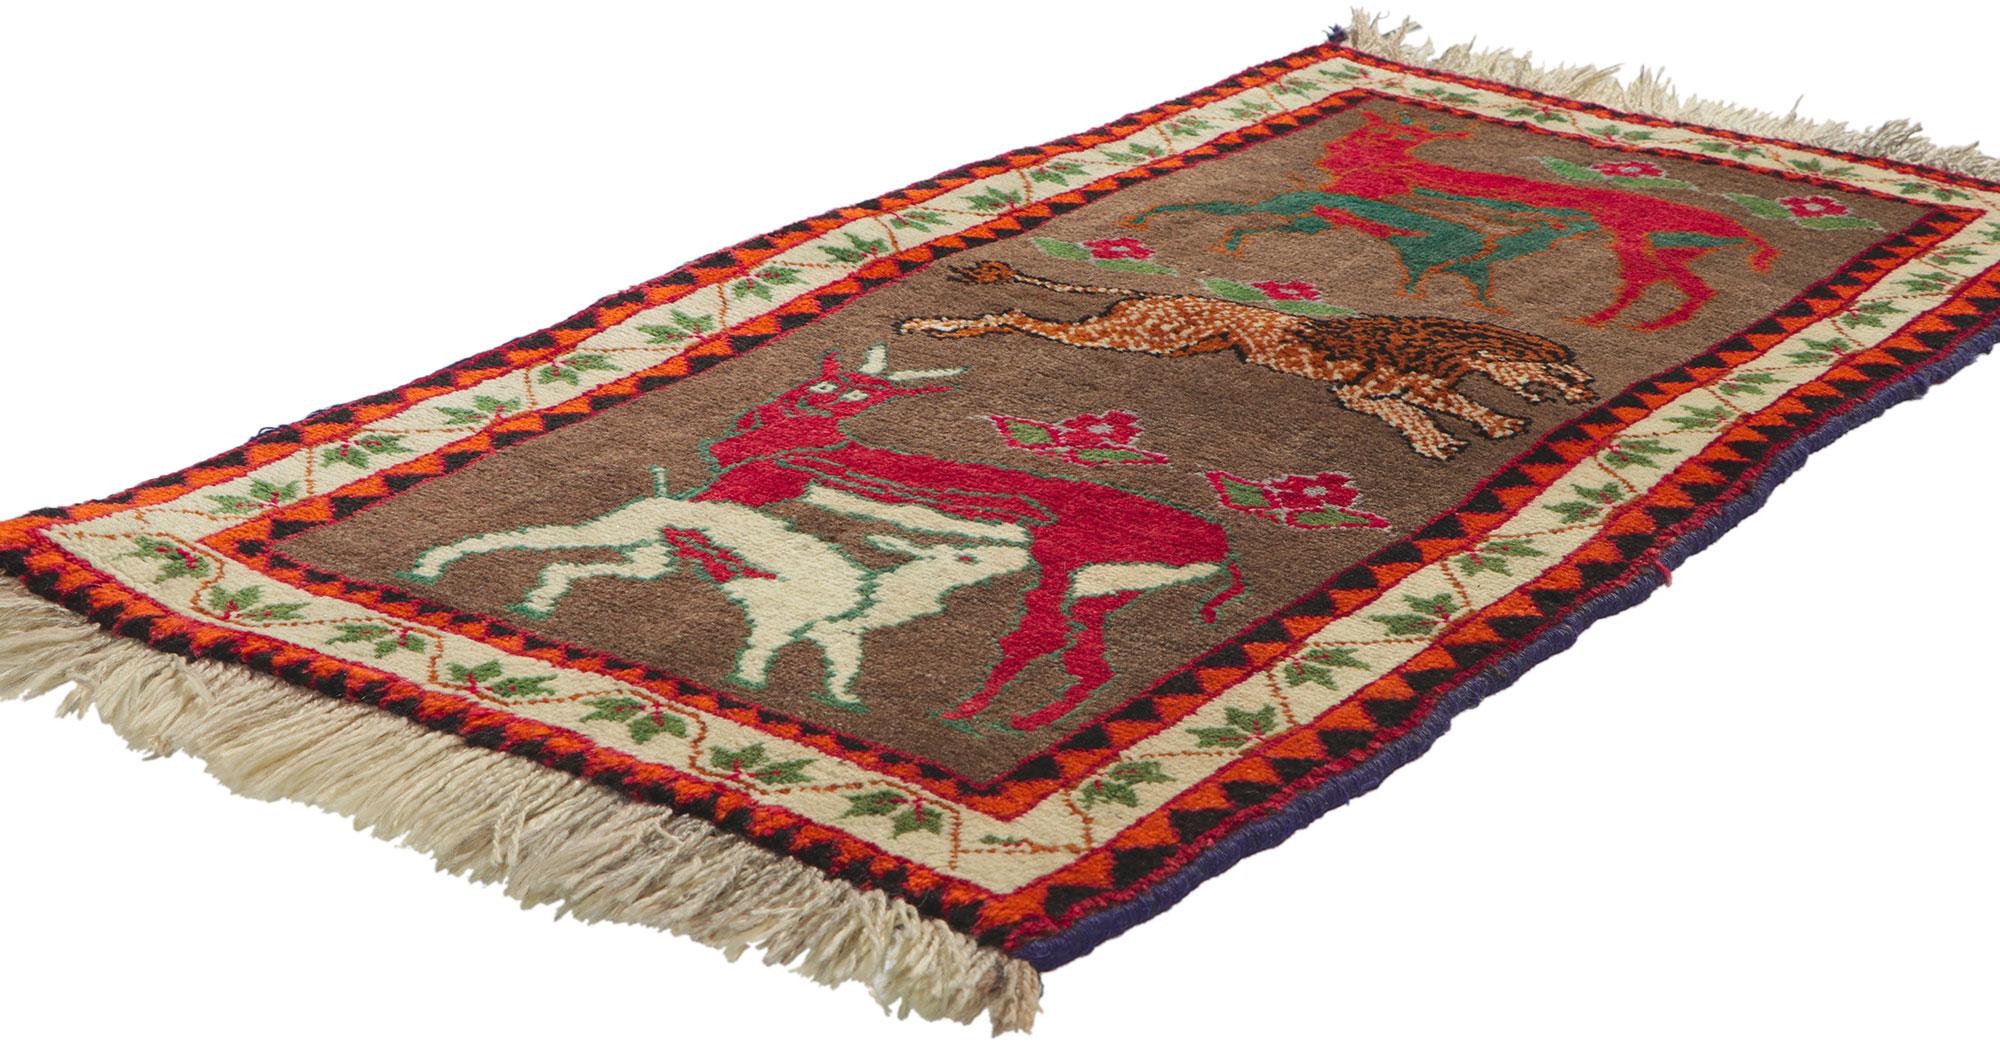 61055 Vintage Persian Qashqai Gabbeh Rug with Zoomorphic Design 02'03 x 04'03. Reminiscences of an exotic journey and worldly sophistication, this hand-knotted wool vintage Persian Qashqai Gabbeh rug is a captivating vision of woven beauty. The